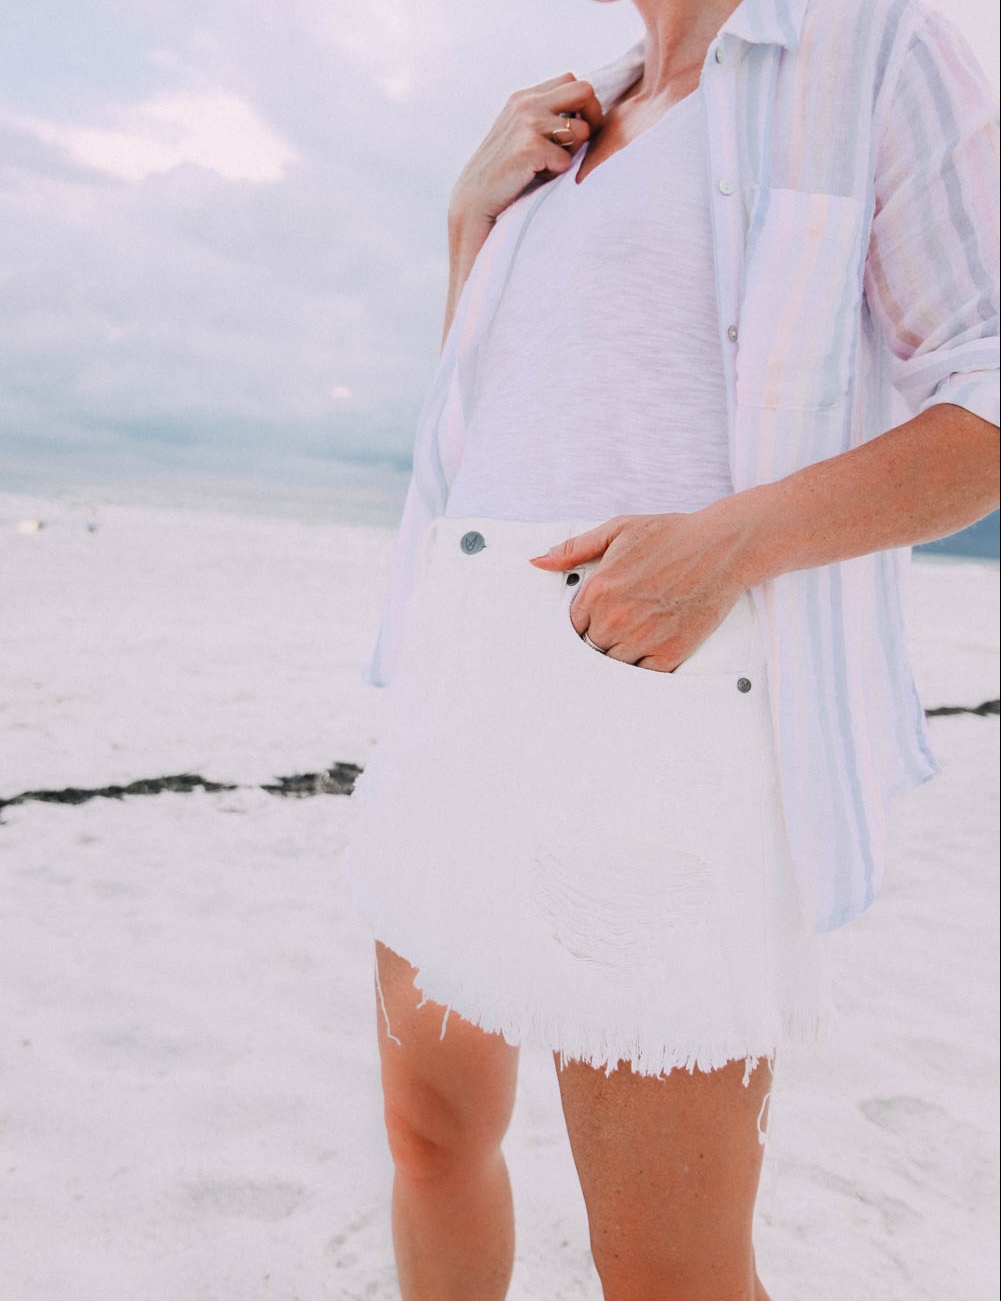 Skorts, Fashion blogger Erin Busbee of BusbeeStyle.com wearing a white denim skort fro Revolve with a Madewell tee and Rails striped button down on the beach in Florida